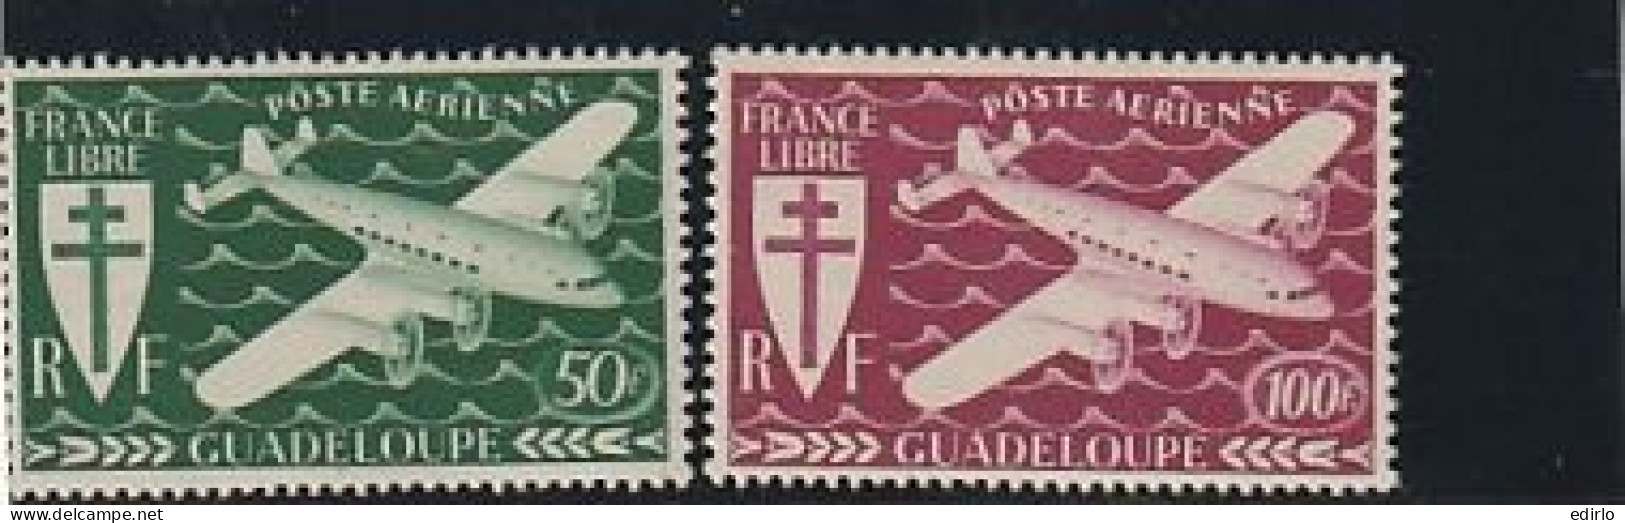 ///   FRANCE ///   GUADELOUPE  Poste Aérienne N° 4/5 ** - Luchtpost